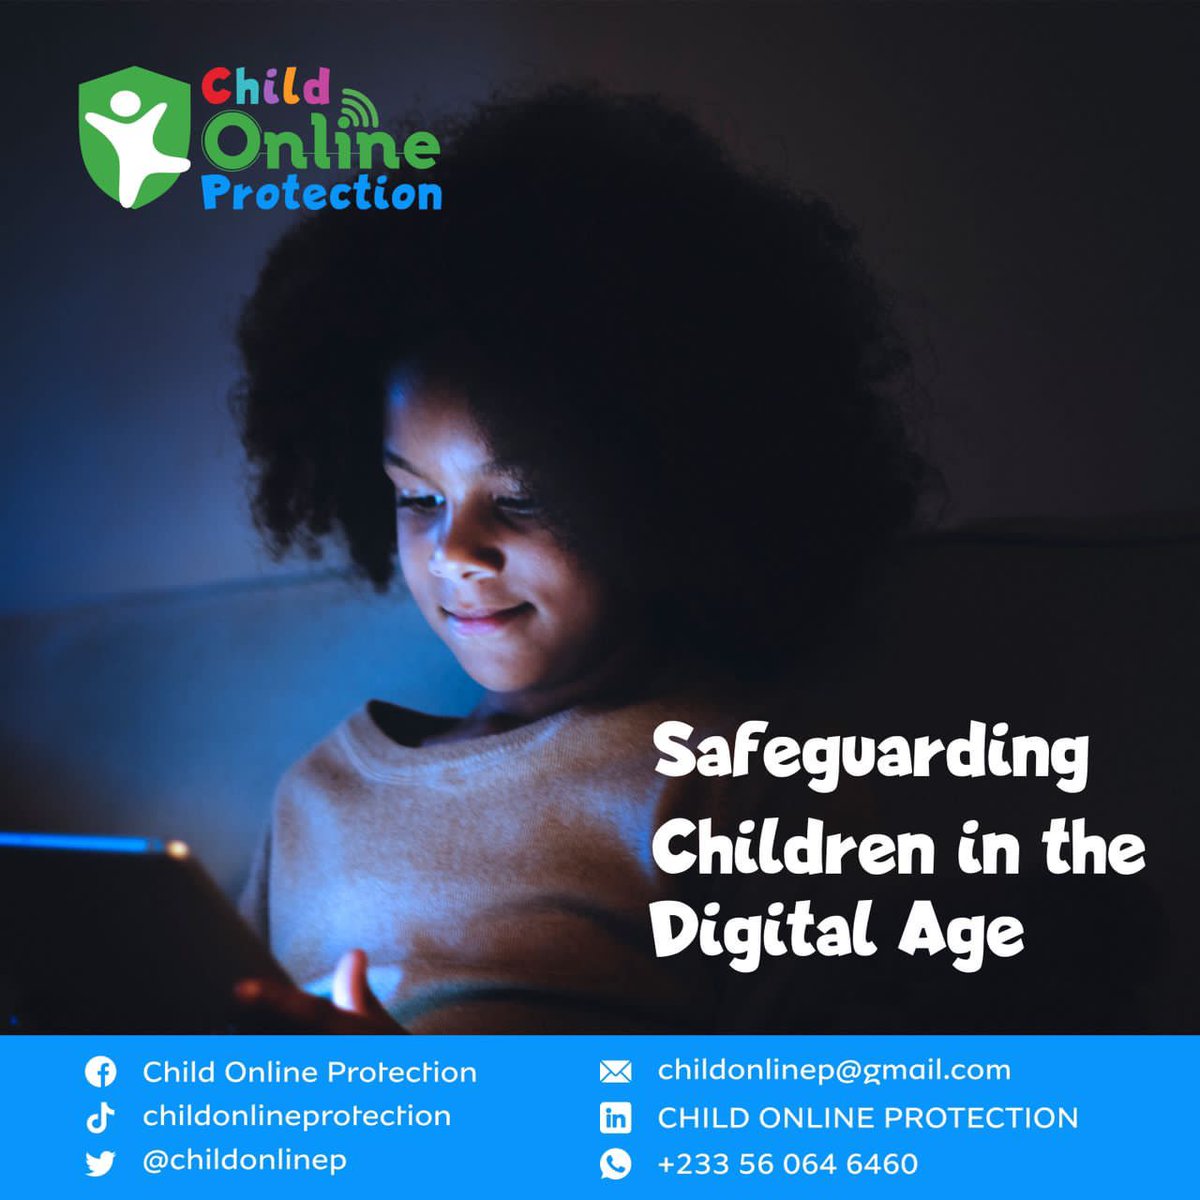 Child Online Protection Campaign! 

Creating a safe digital haven for children to explore, learn and thrive! 

Join us, let's protect the next generation
#ChildonlineProtection